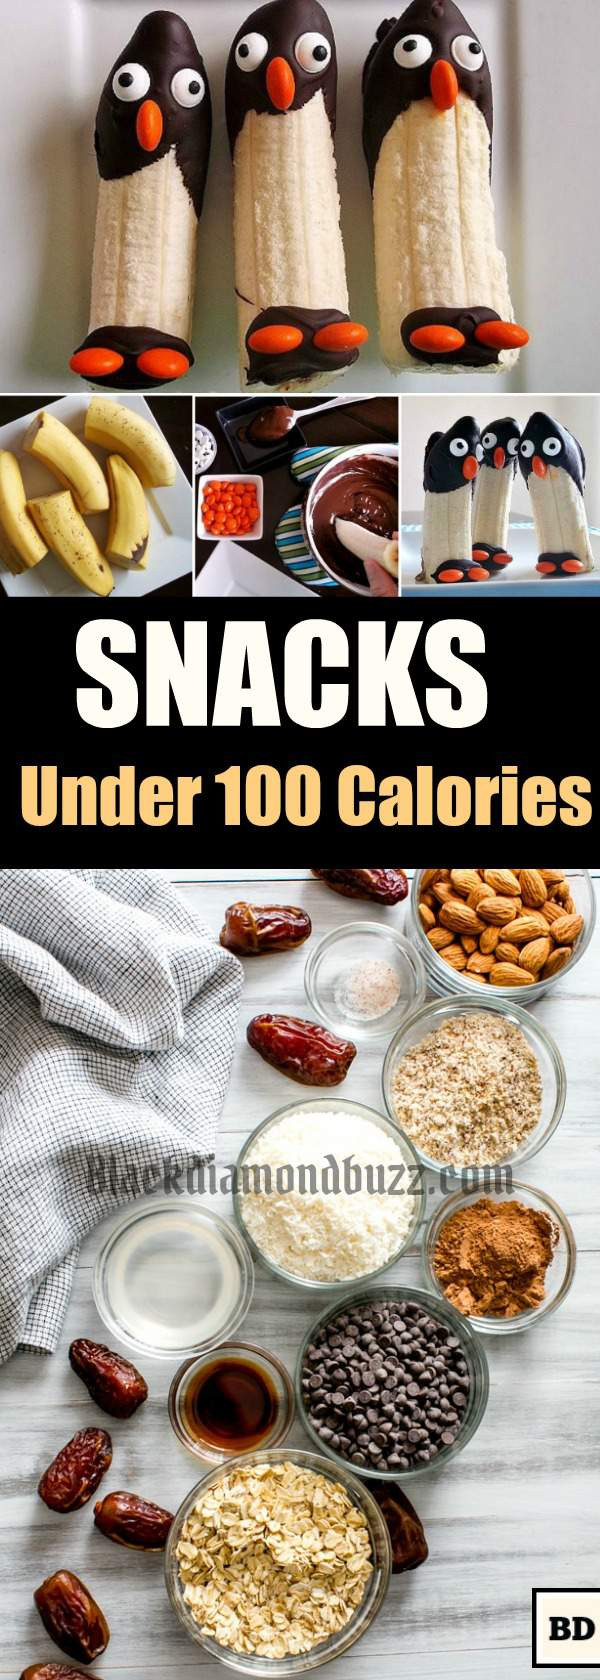 Low Calorie Pretzels
 10 Best Easy Healthy Low Calorie Snacks for Weight Loss